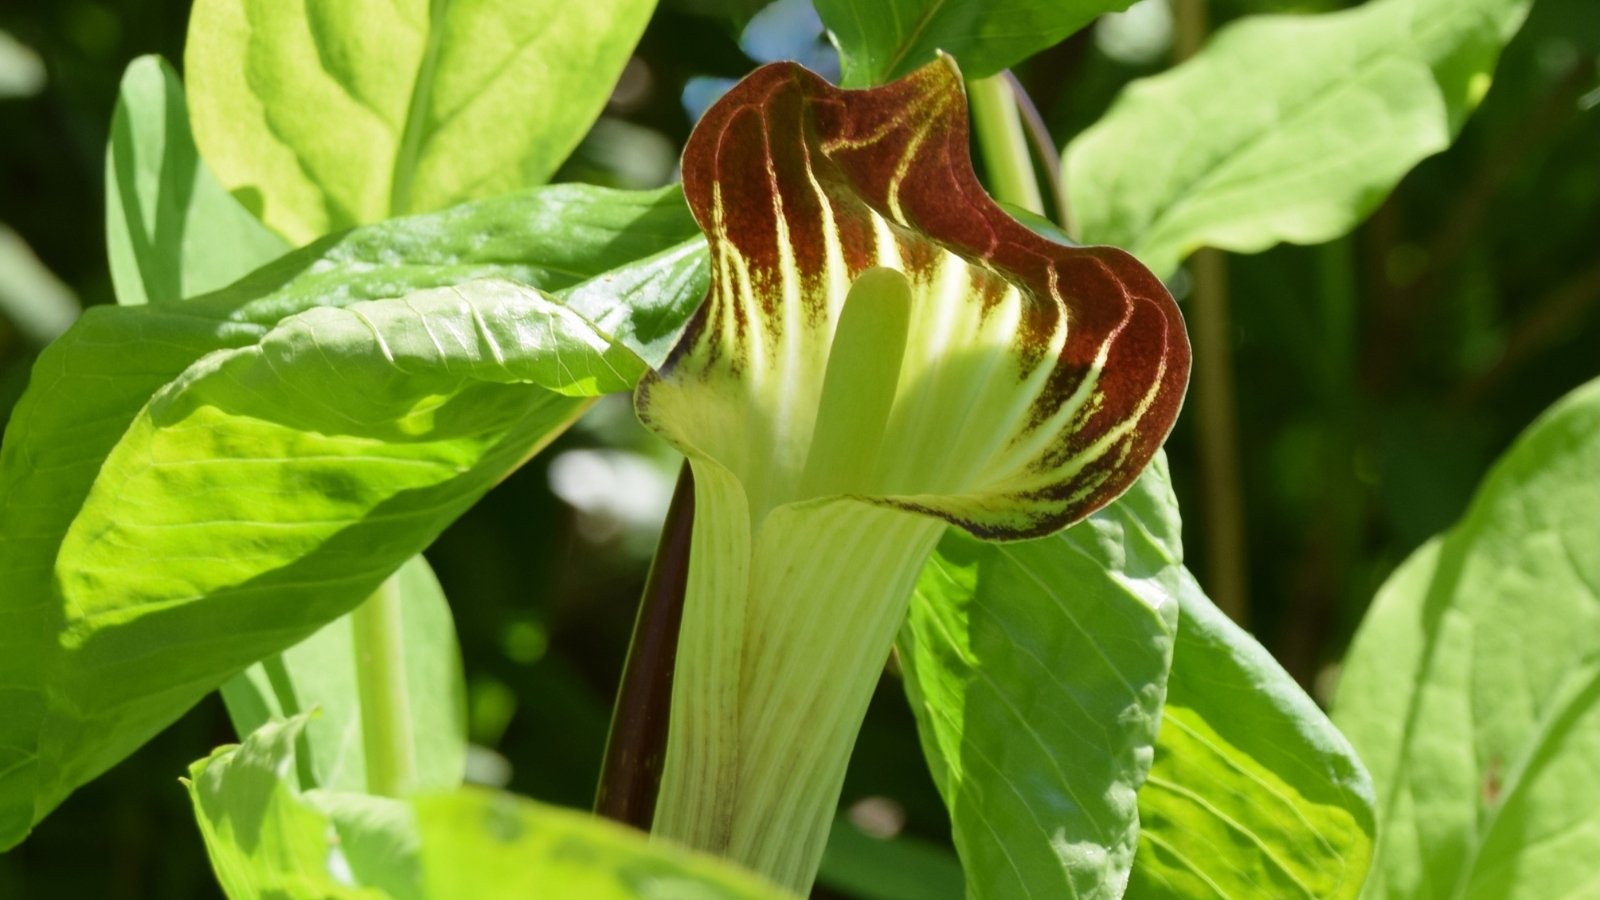 The Arisaema triphyllum in full sun, also known as Jack-in-the-pulpit, features a distinctive hooded flower that encloses a spadix, and has three-part leaves that are glossy and green.